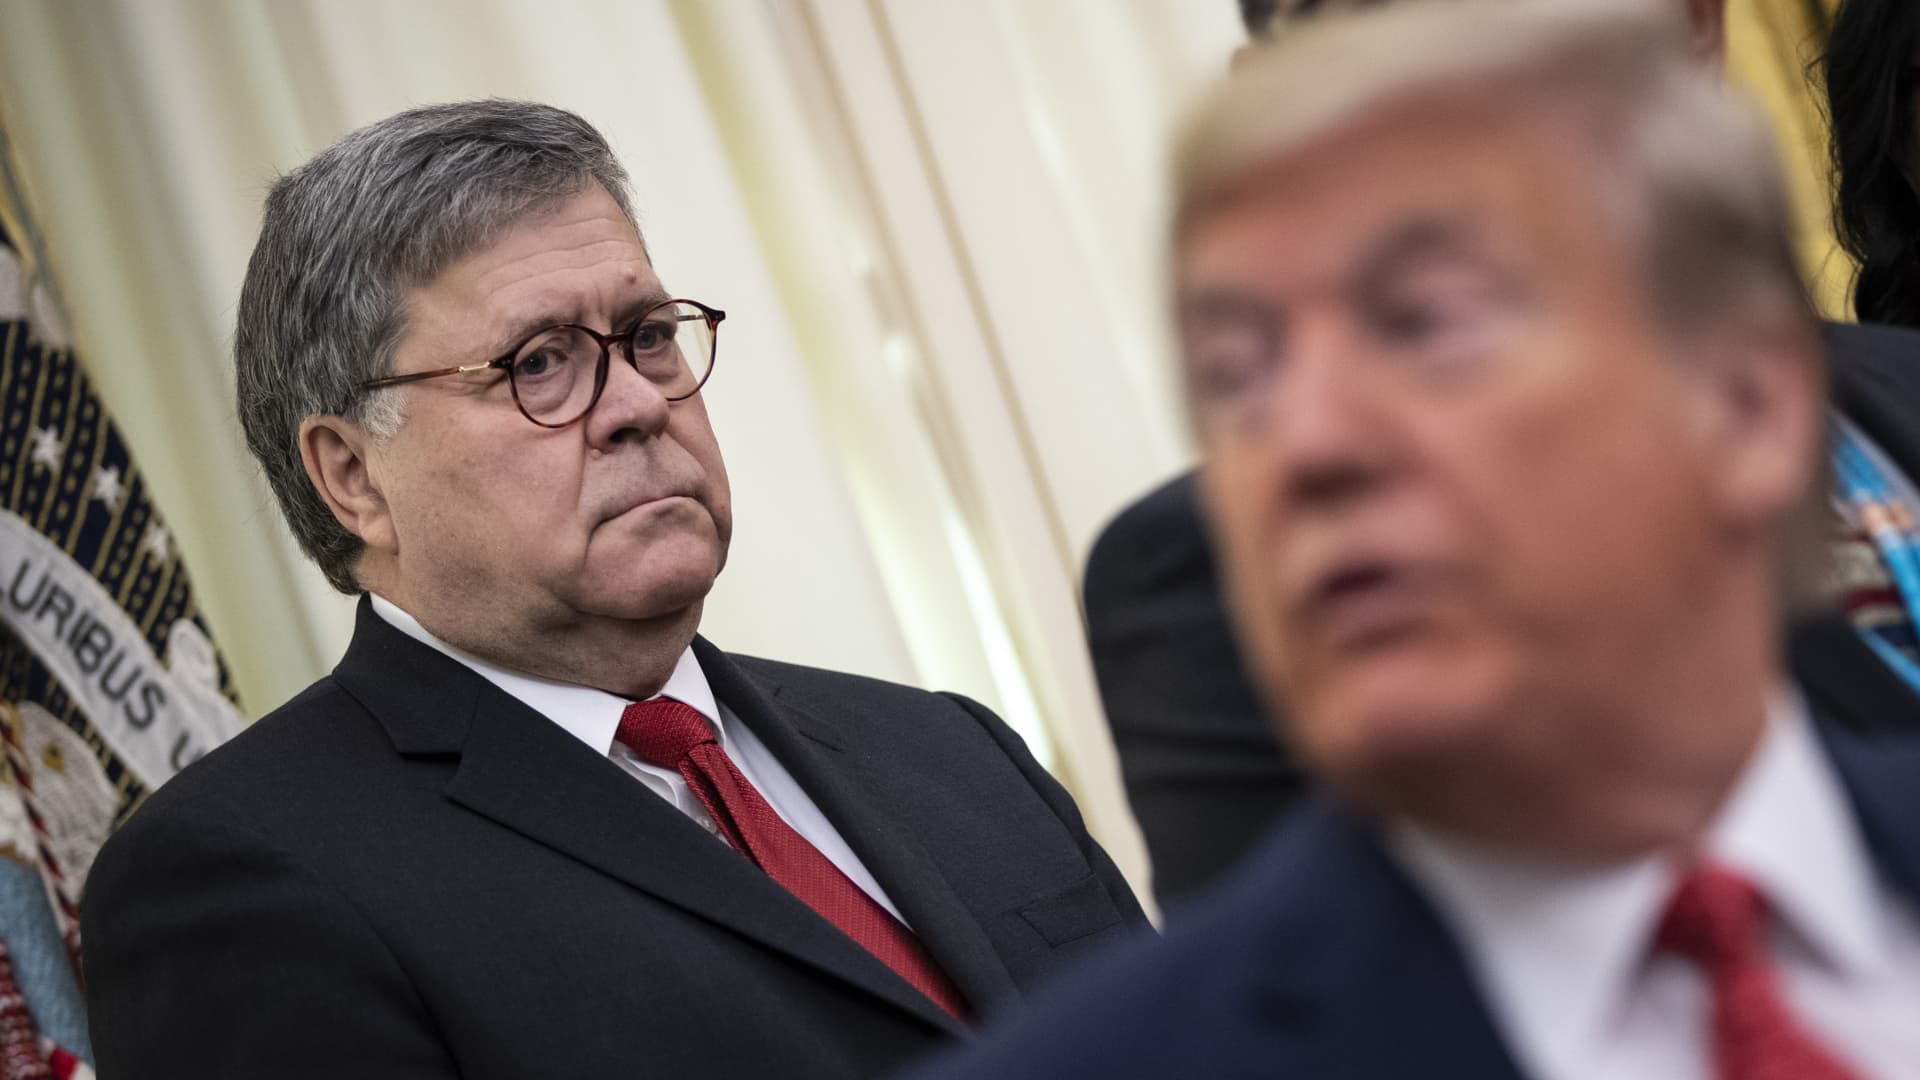 U.S. Attorney General William Barr and U.S. President Donald Trump attend a signing ceremony for an executive order in the Oval Office of the White House on November 26, 2019 in Washington, DC.